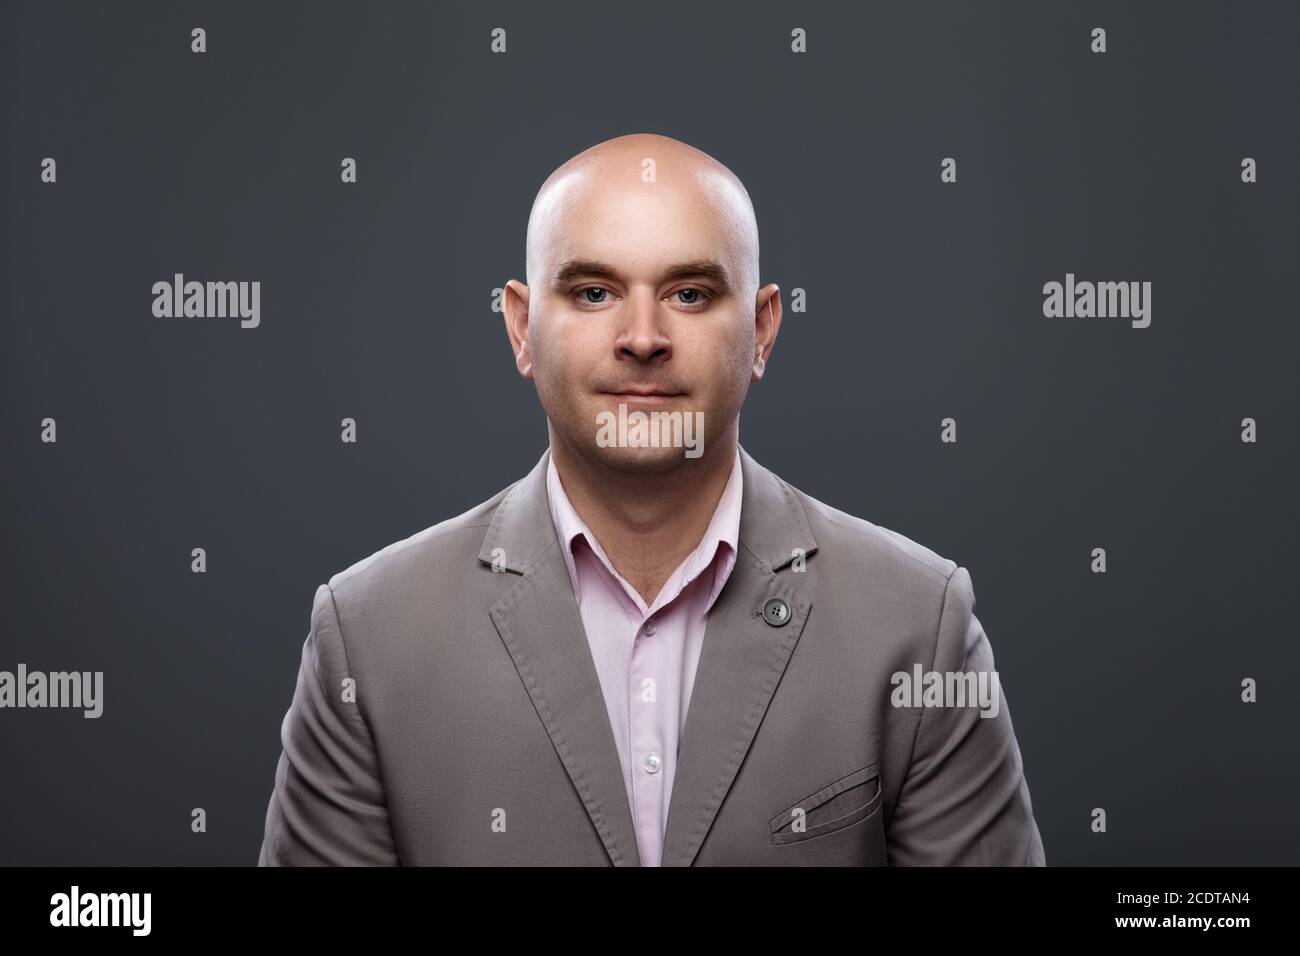 Portrait of a bald affable man in a suit against a dark background Stock Photo